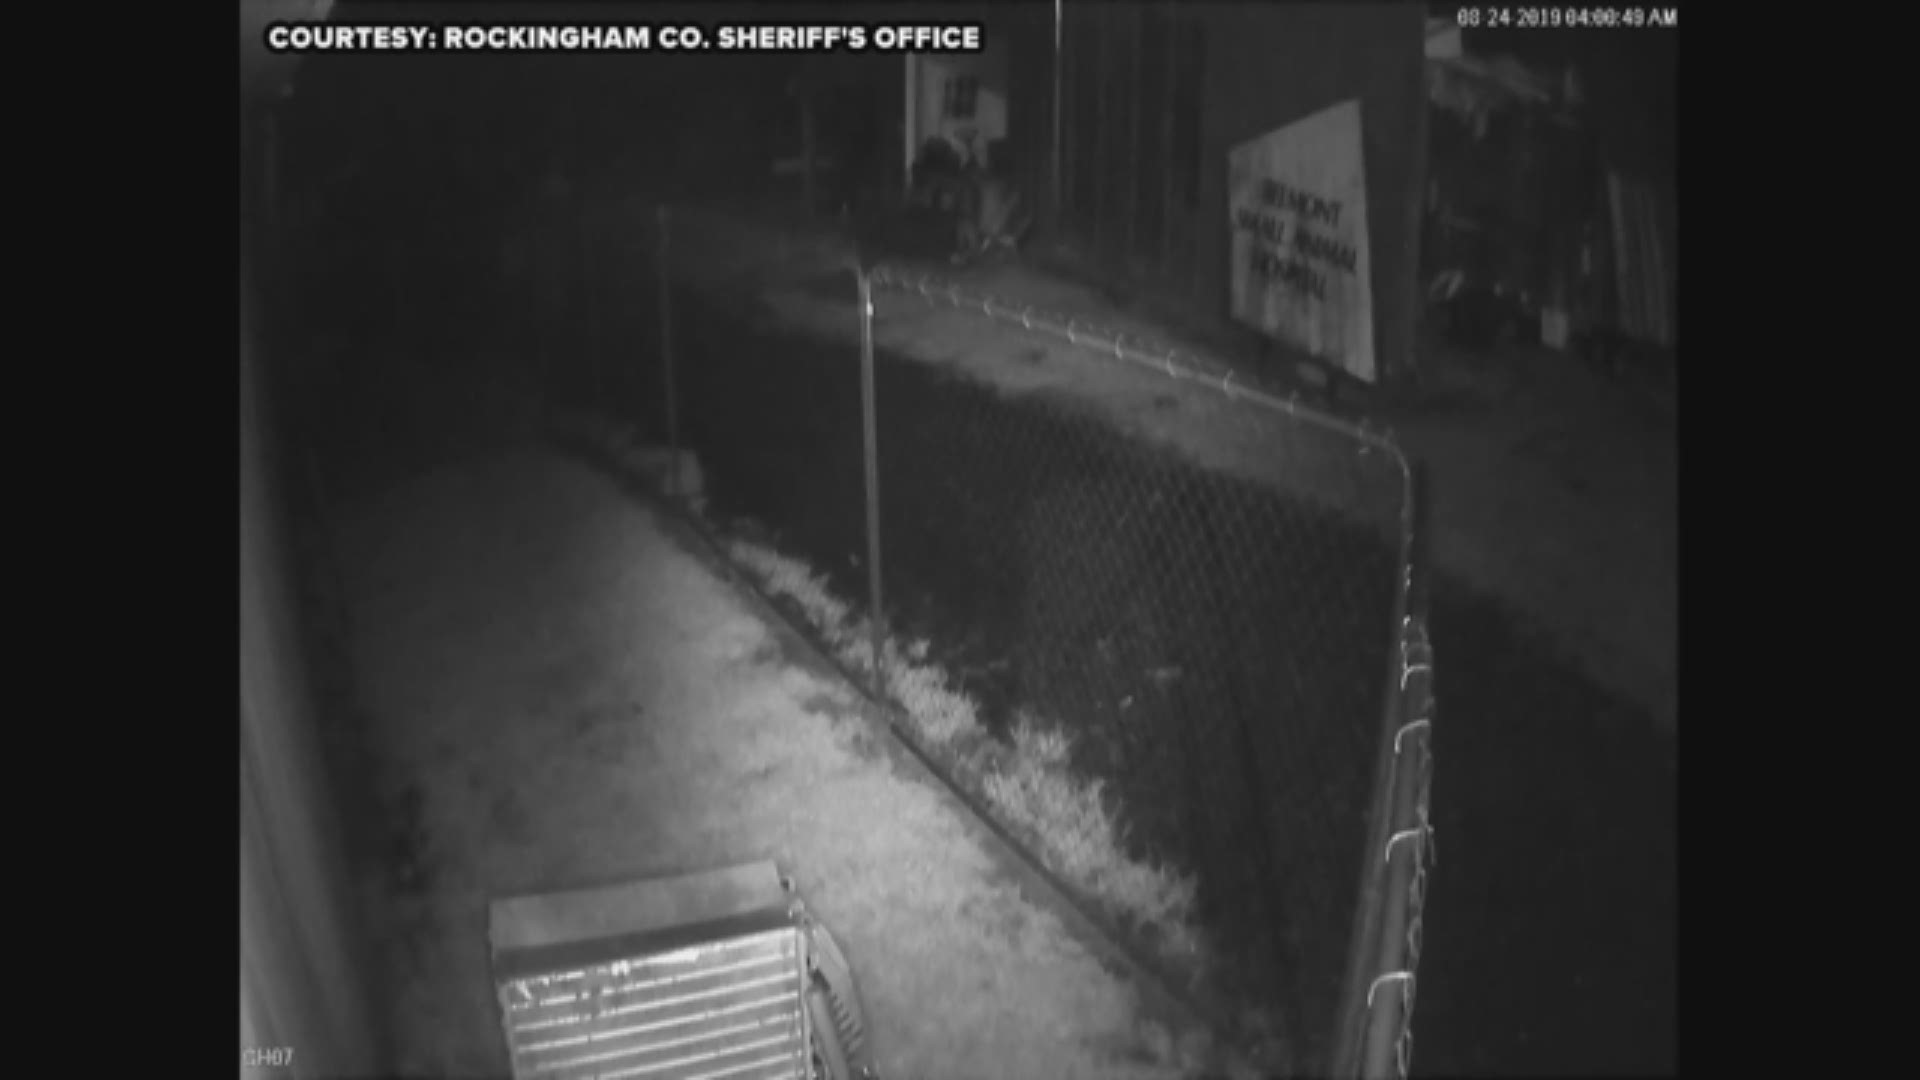 The Rockingham County Sheriff’s Office is investigating an ATV theft from Lakeside K-9 Dog Training Services.